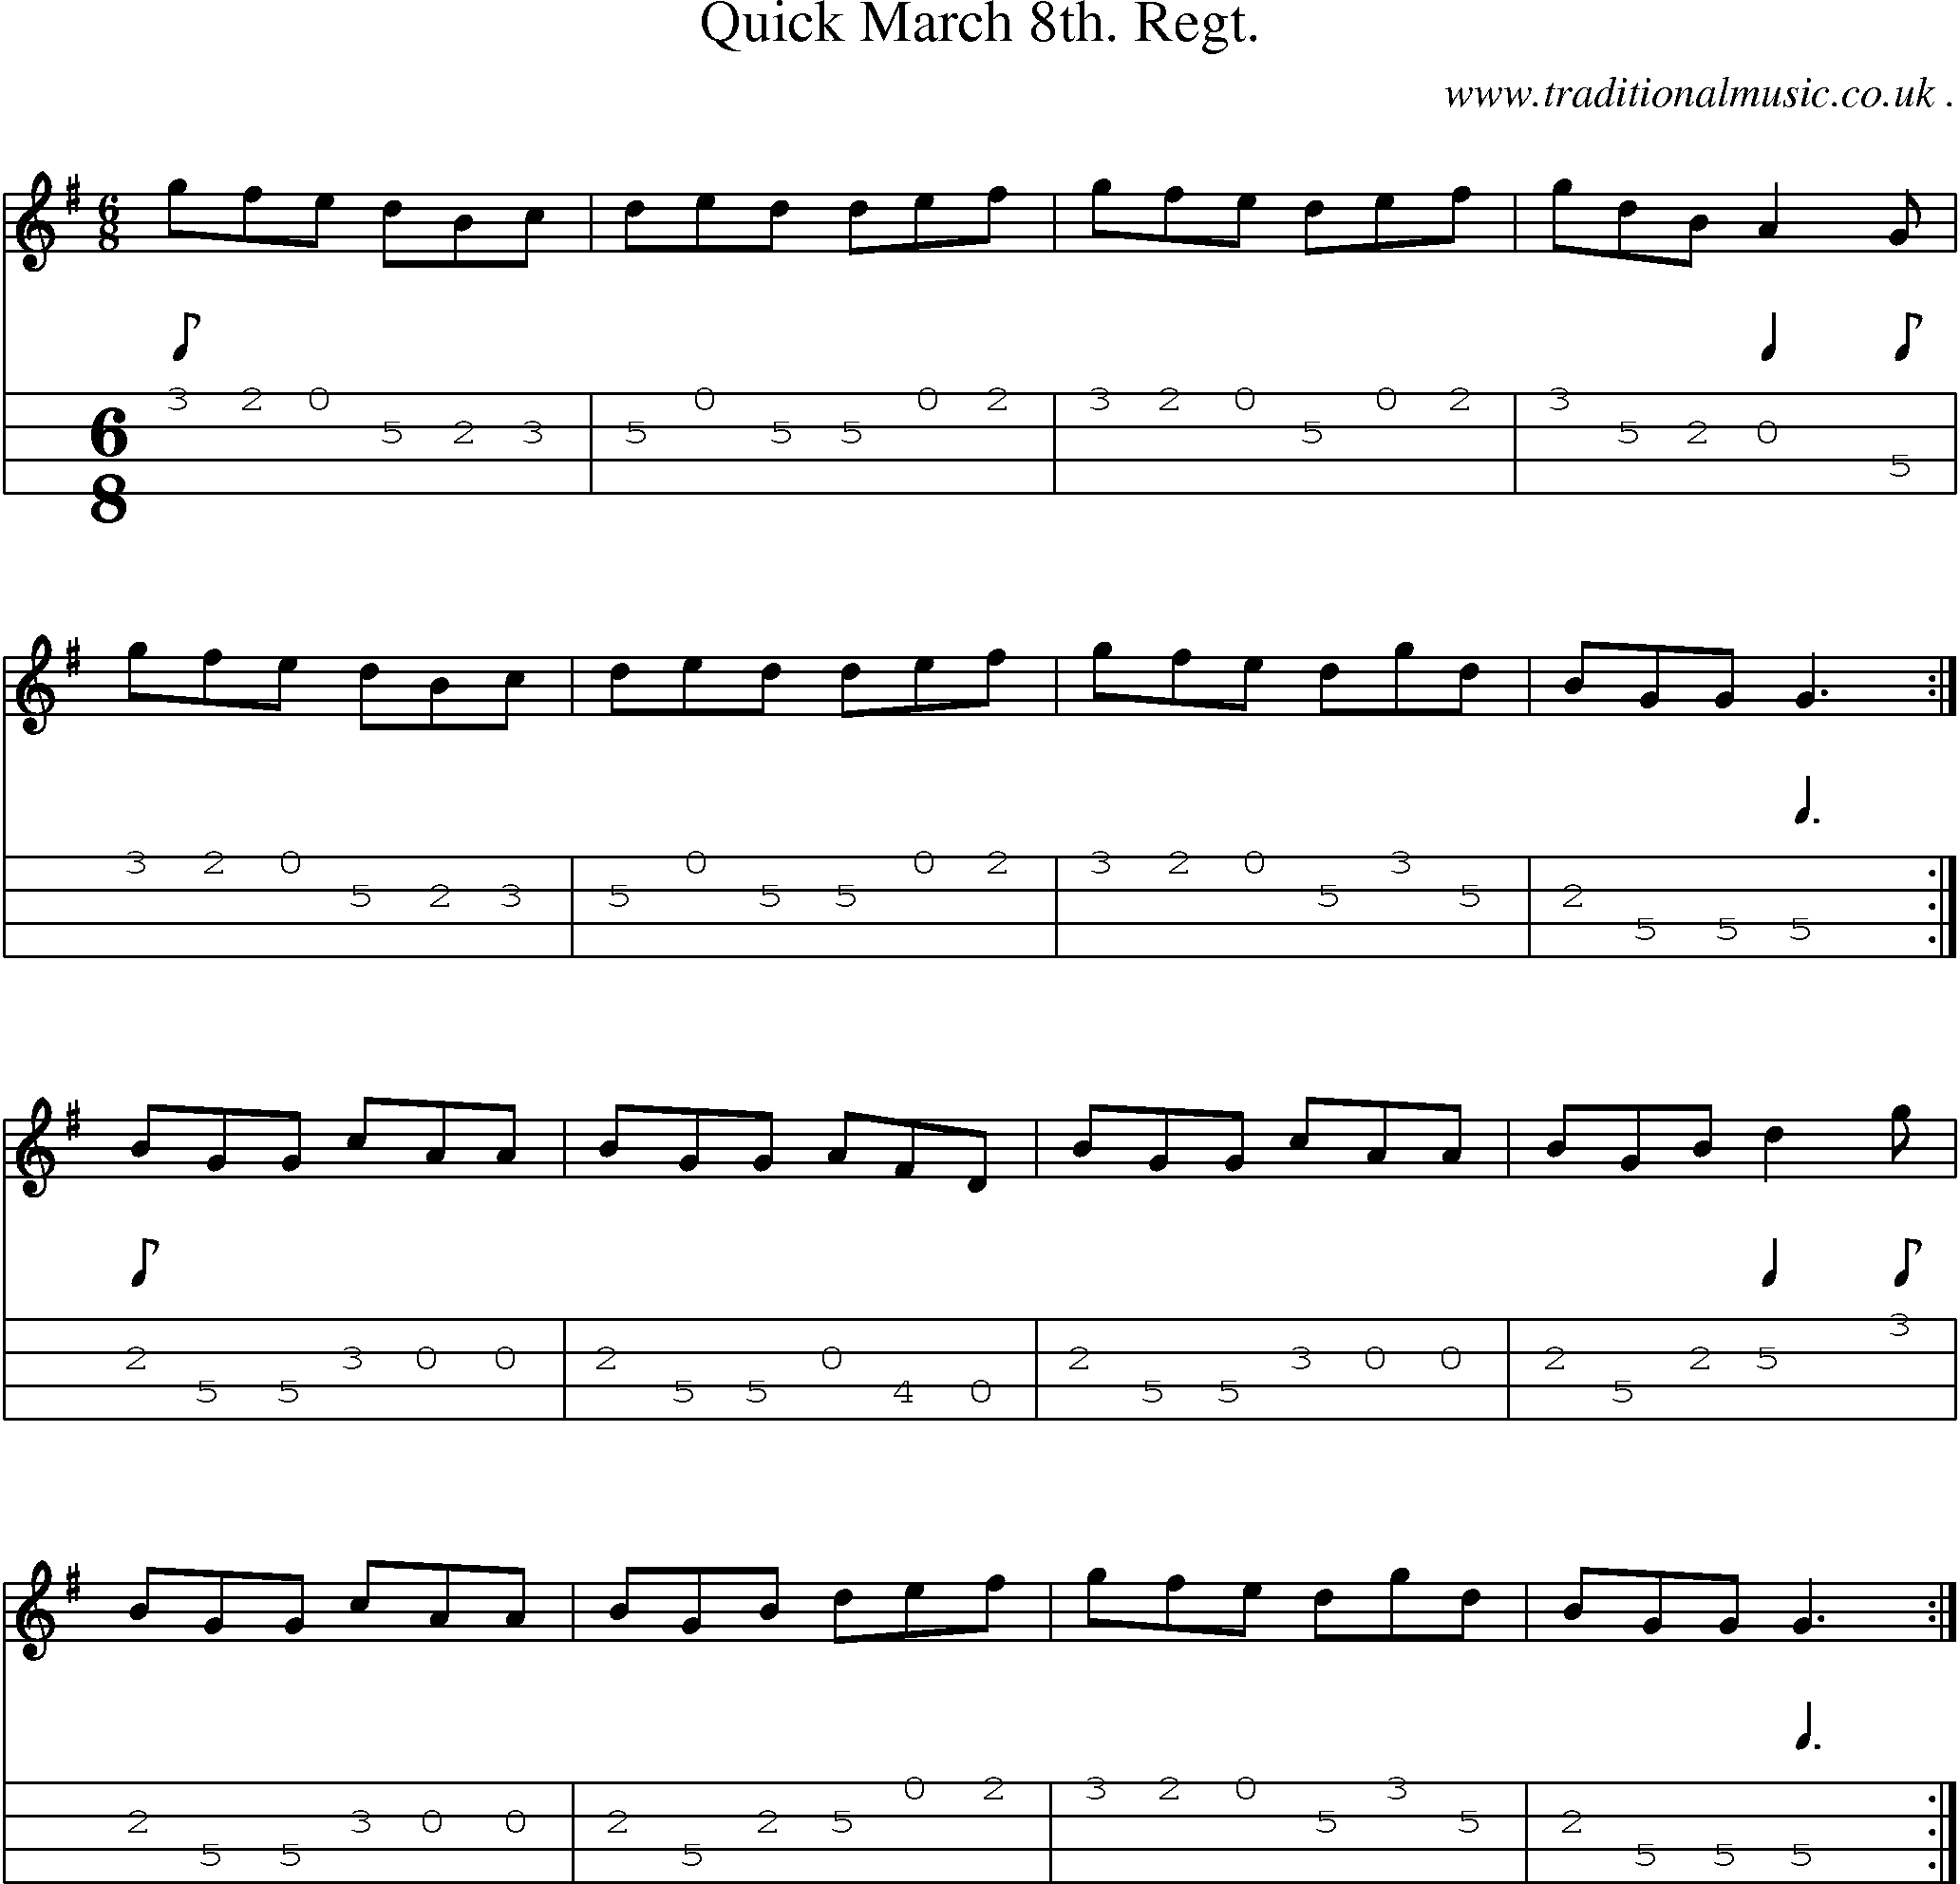 Sheet-Music and Mandolin Tabs for Quick March 8th Regt